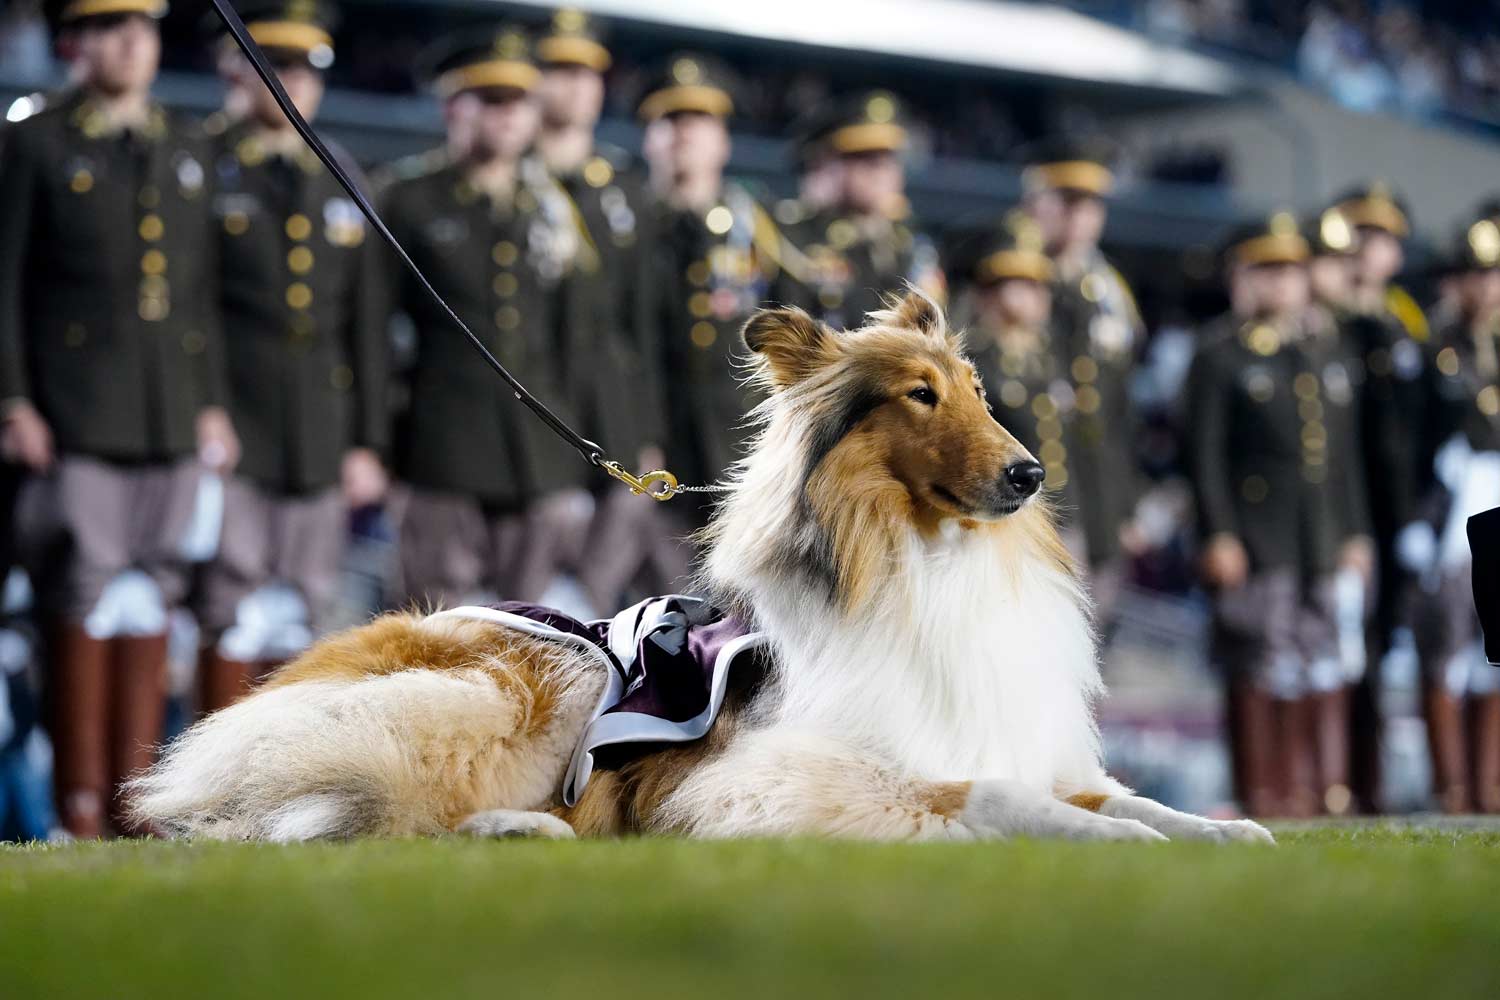 Texas A&M's official mascot, Reveille, on the sidelines of a football game